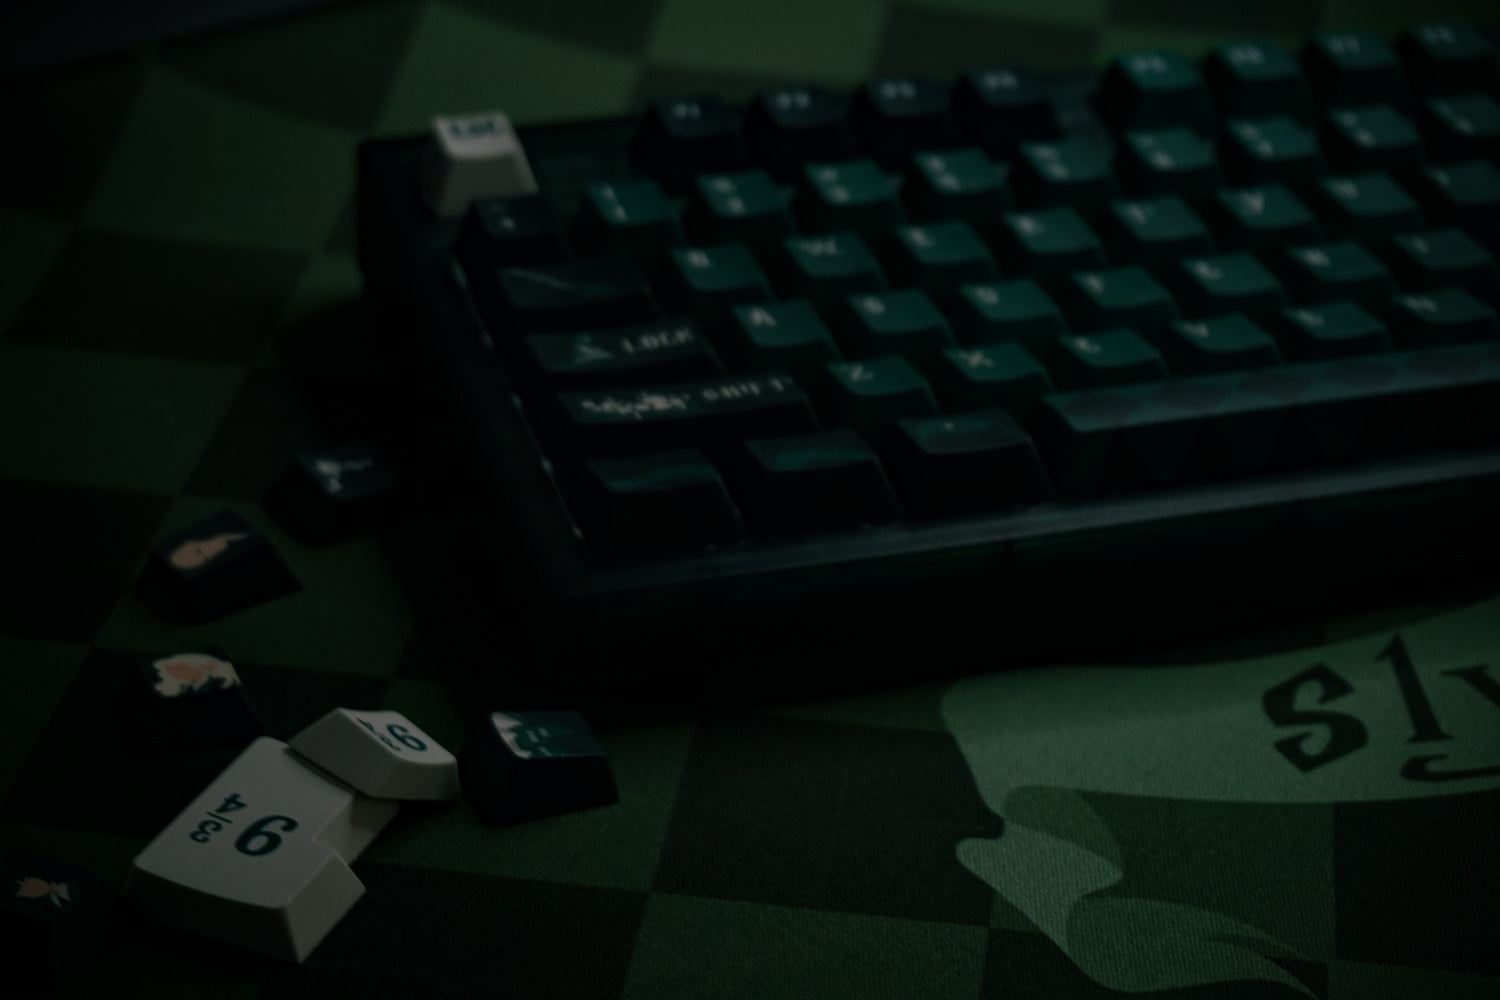 This is our Harry Potter Series of Slytherin Mechanical Keyboard Keycap Set. The whole is made of our designed Slytherin keycaps with MK870 mechanical keyboard, and the overall tone is the dark green colour of Slytherin House. The keyboard is available in three modes, wired mode, wireless mode, multi-device switching mode, USB-C port, please see details below.